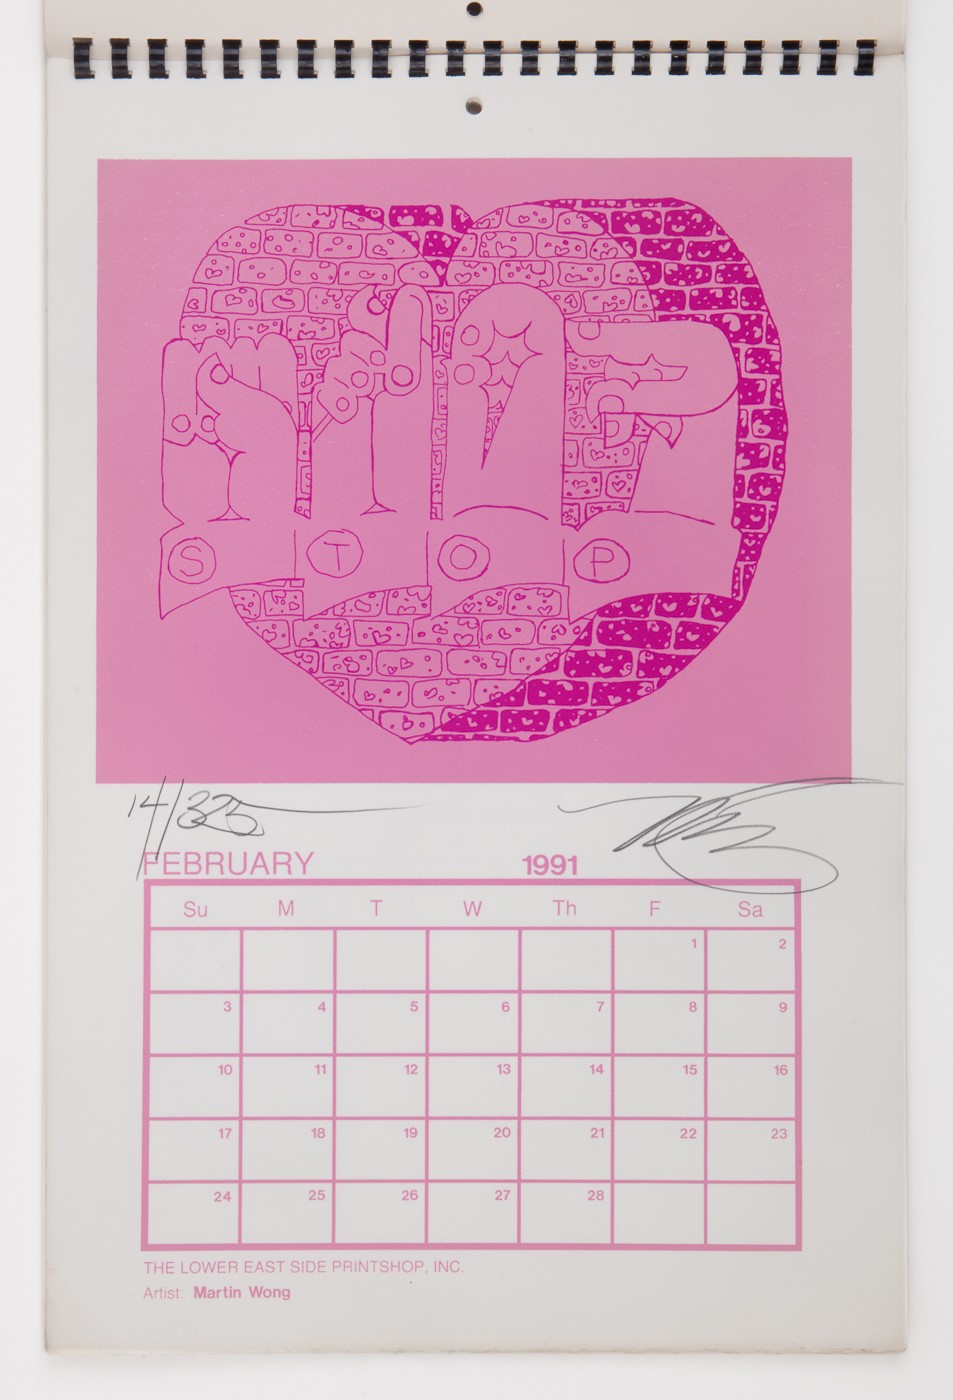 A calendar page for Feburary 1991 with a pink graffiti-like illustration.